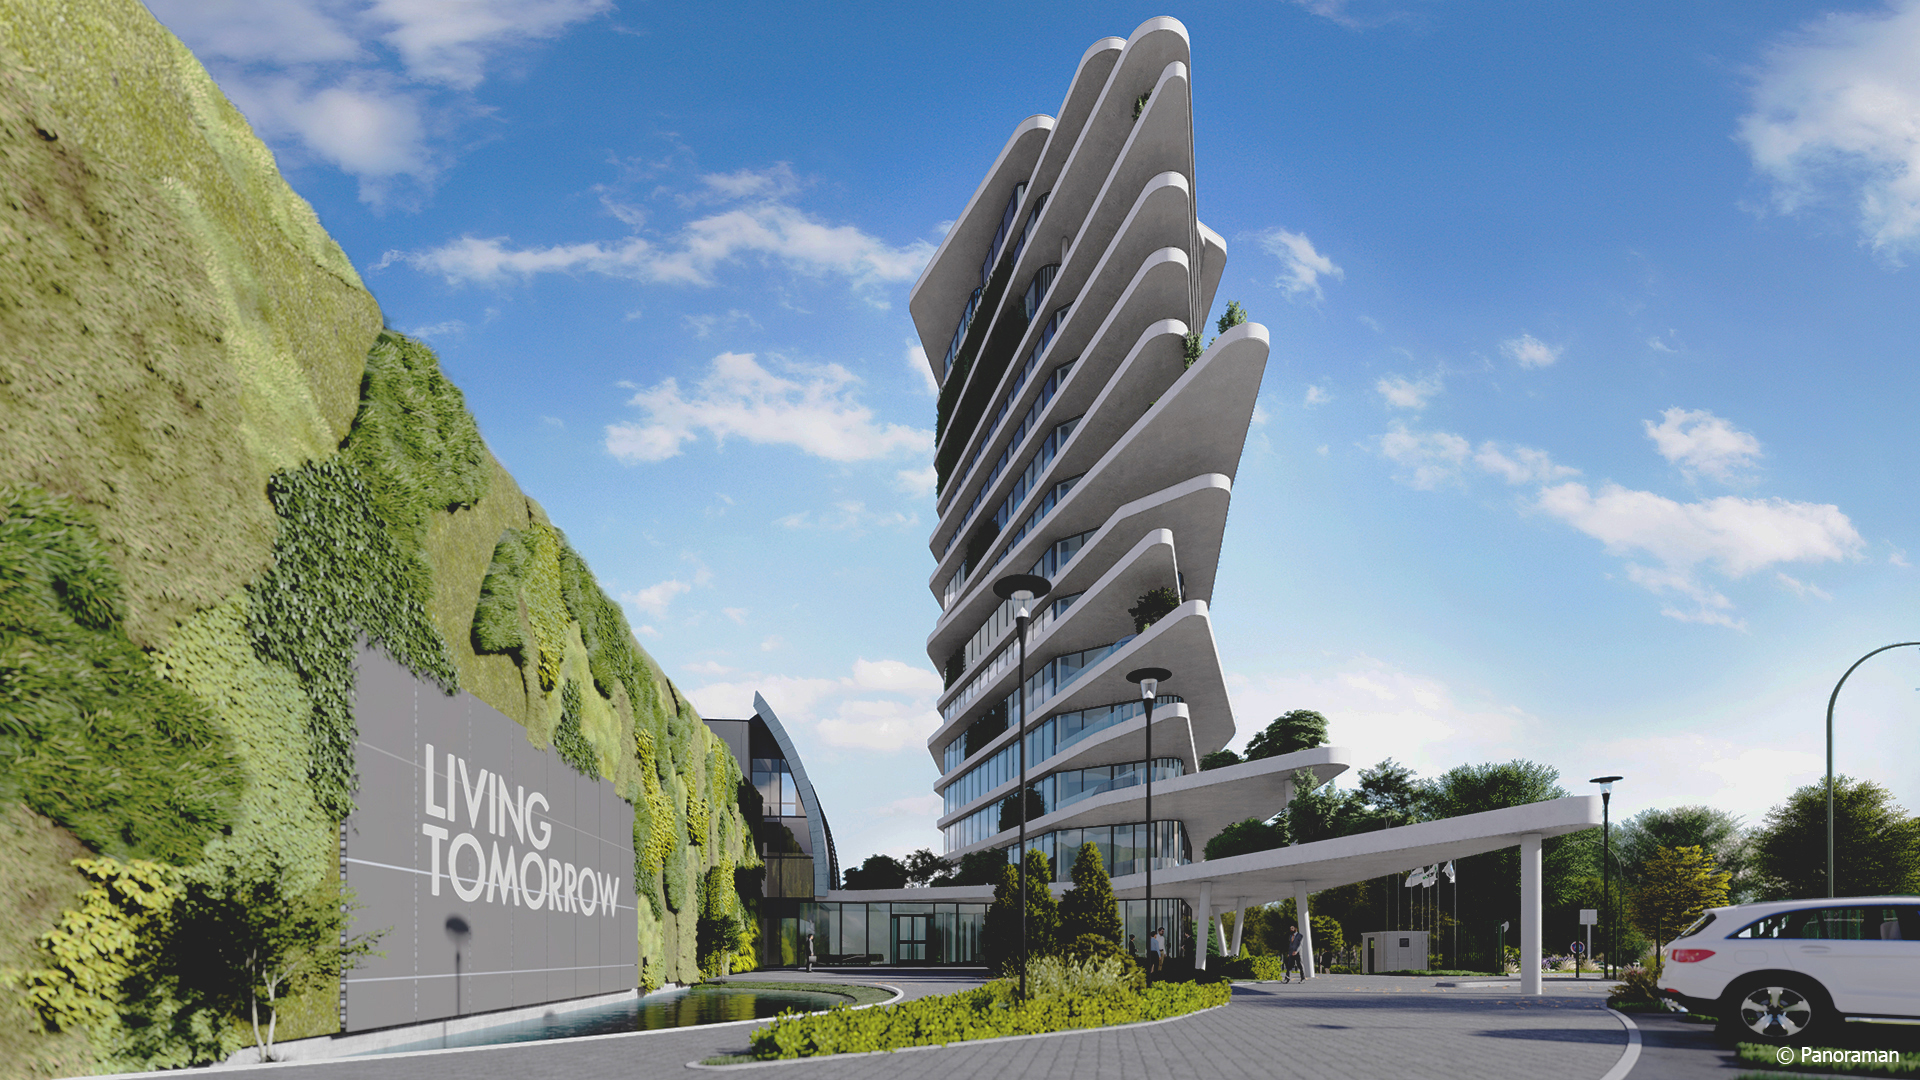 PREM GROUP TO OPERATE NEW FUTURISTIC HOTEL AT INNOVATION CAMPUS LIVING TOMORROW – BRUSSELS